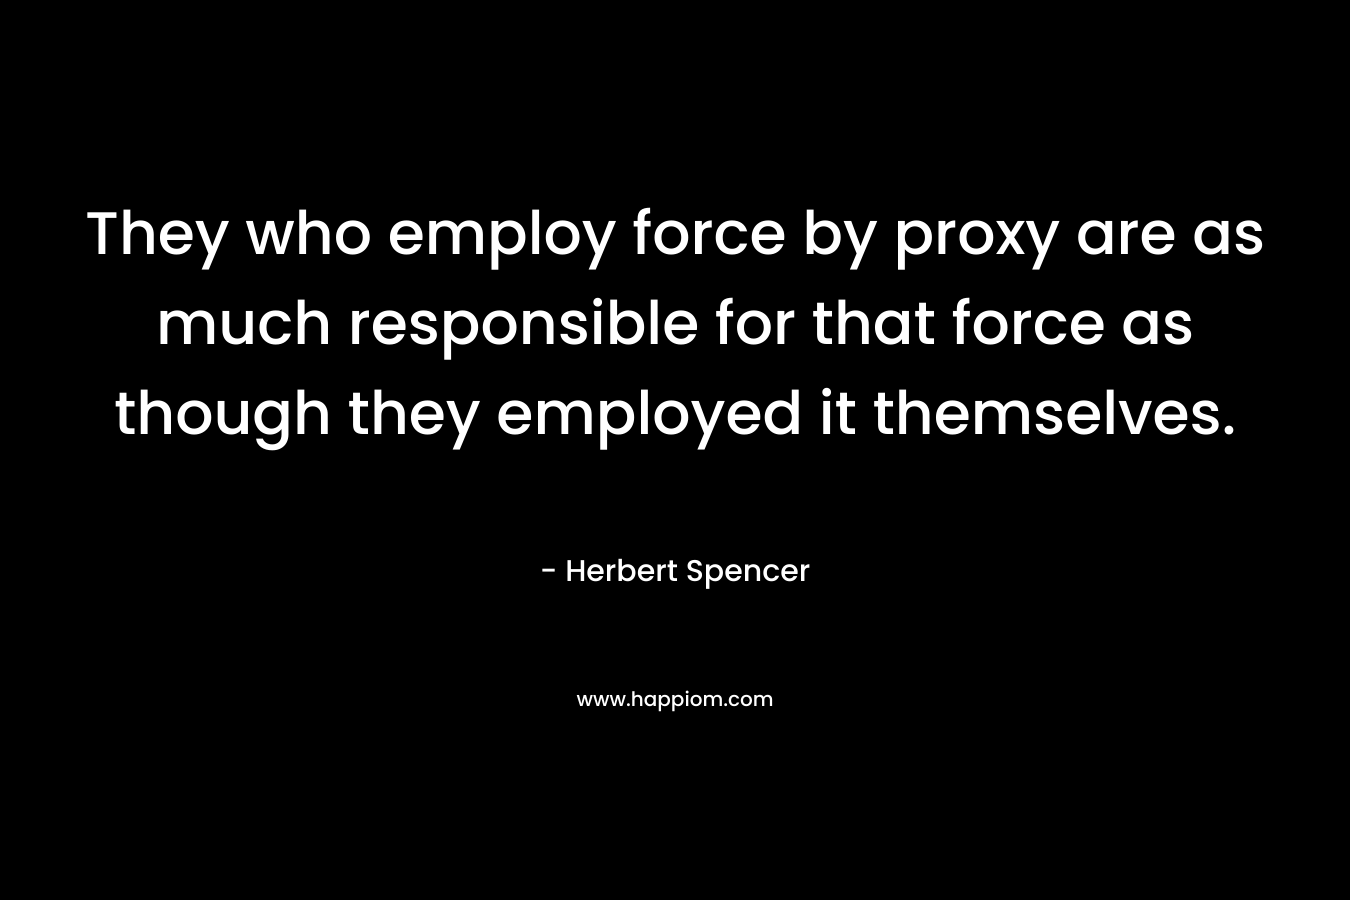 They who employ force by proxy are as much responsible for that force as though they employed it themselves. – Herbert Spencer